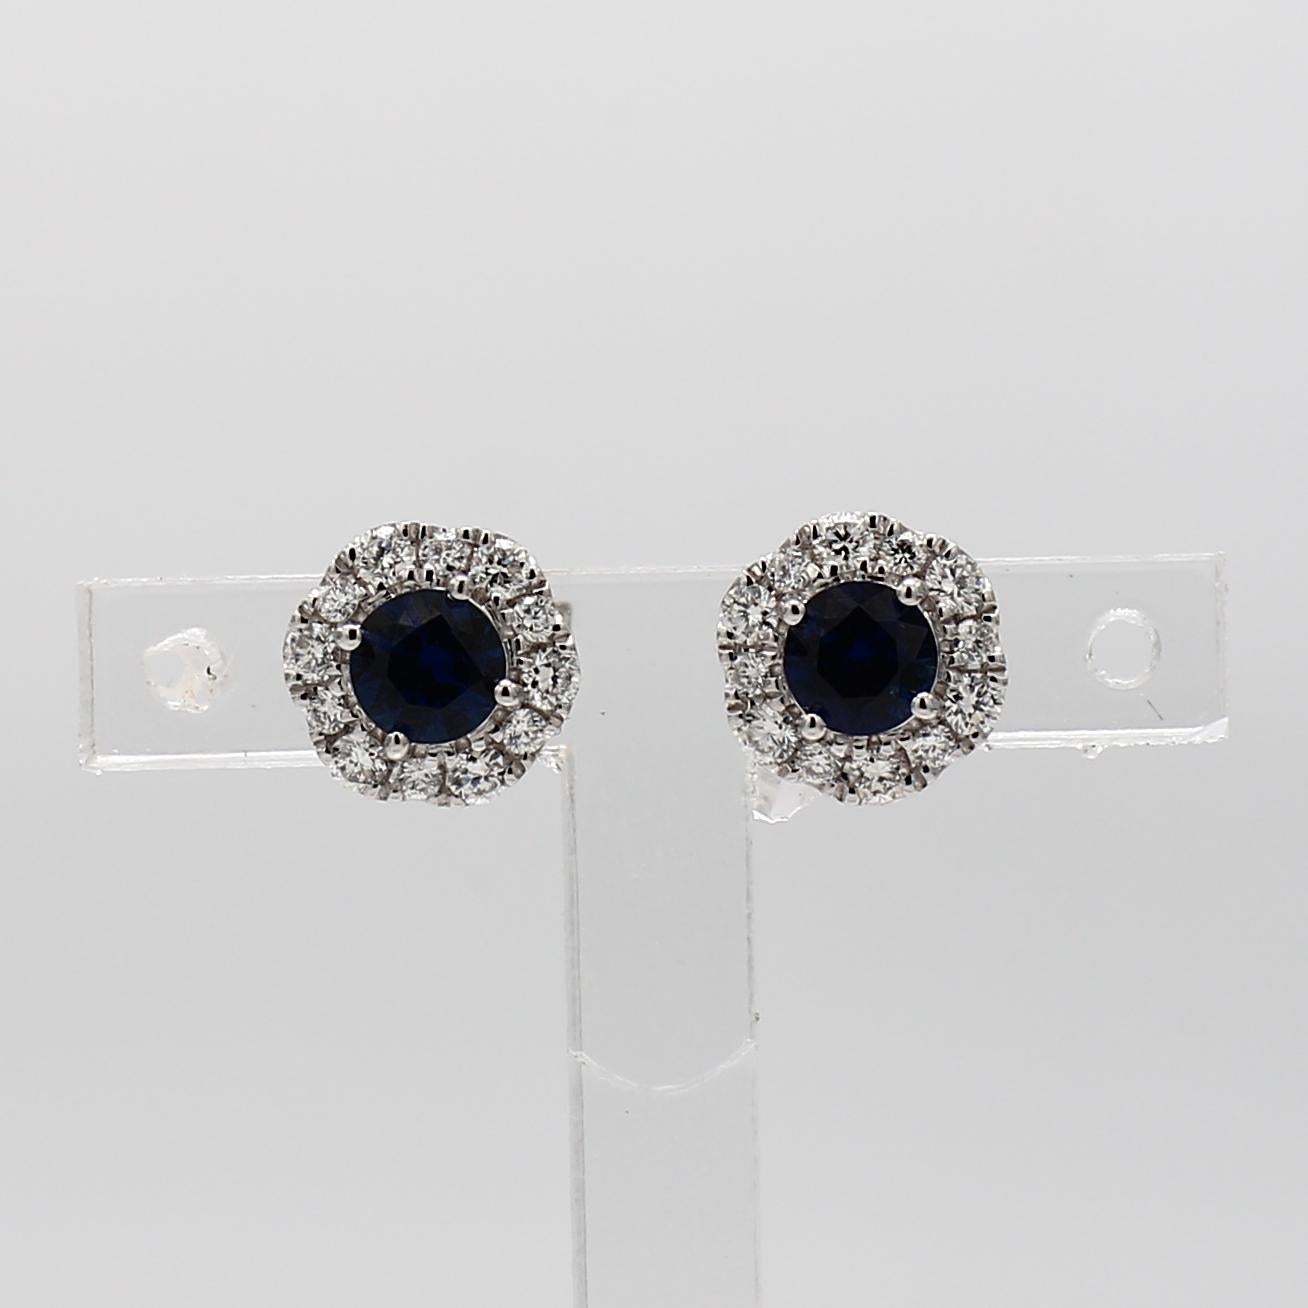 RareGemWorld's classic sapphire earrings. Mounted in a beautiful 14K White Gold setting with natural round cut blue sapphires. The sapphires are surrounded by natural round white diamond melee in a beautiful single halo. These earrings are